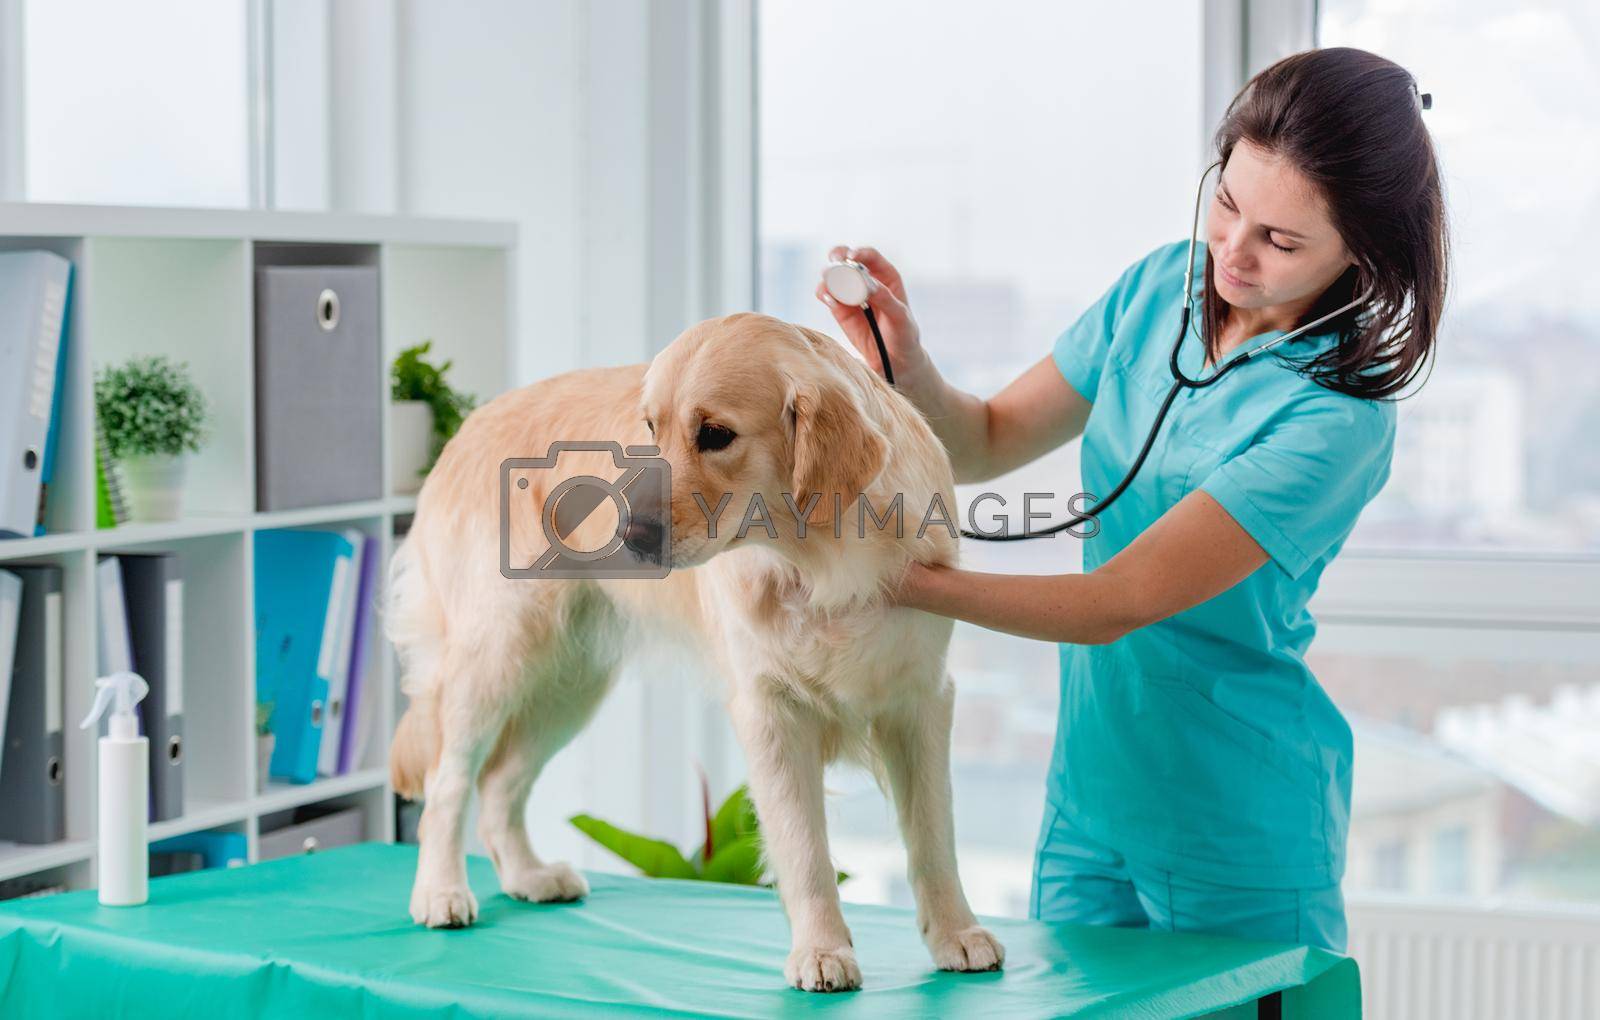 Royalty free image of Golden retriever dog in veterinary clinic by tan4ikk1